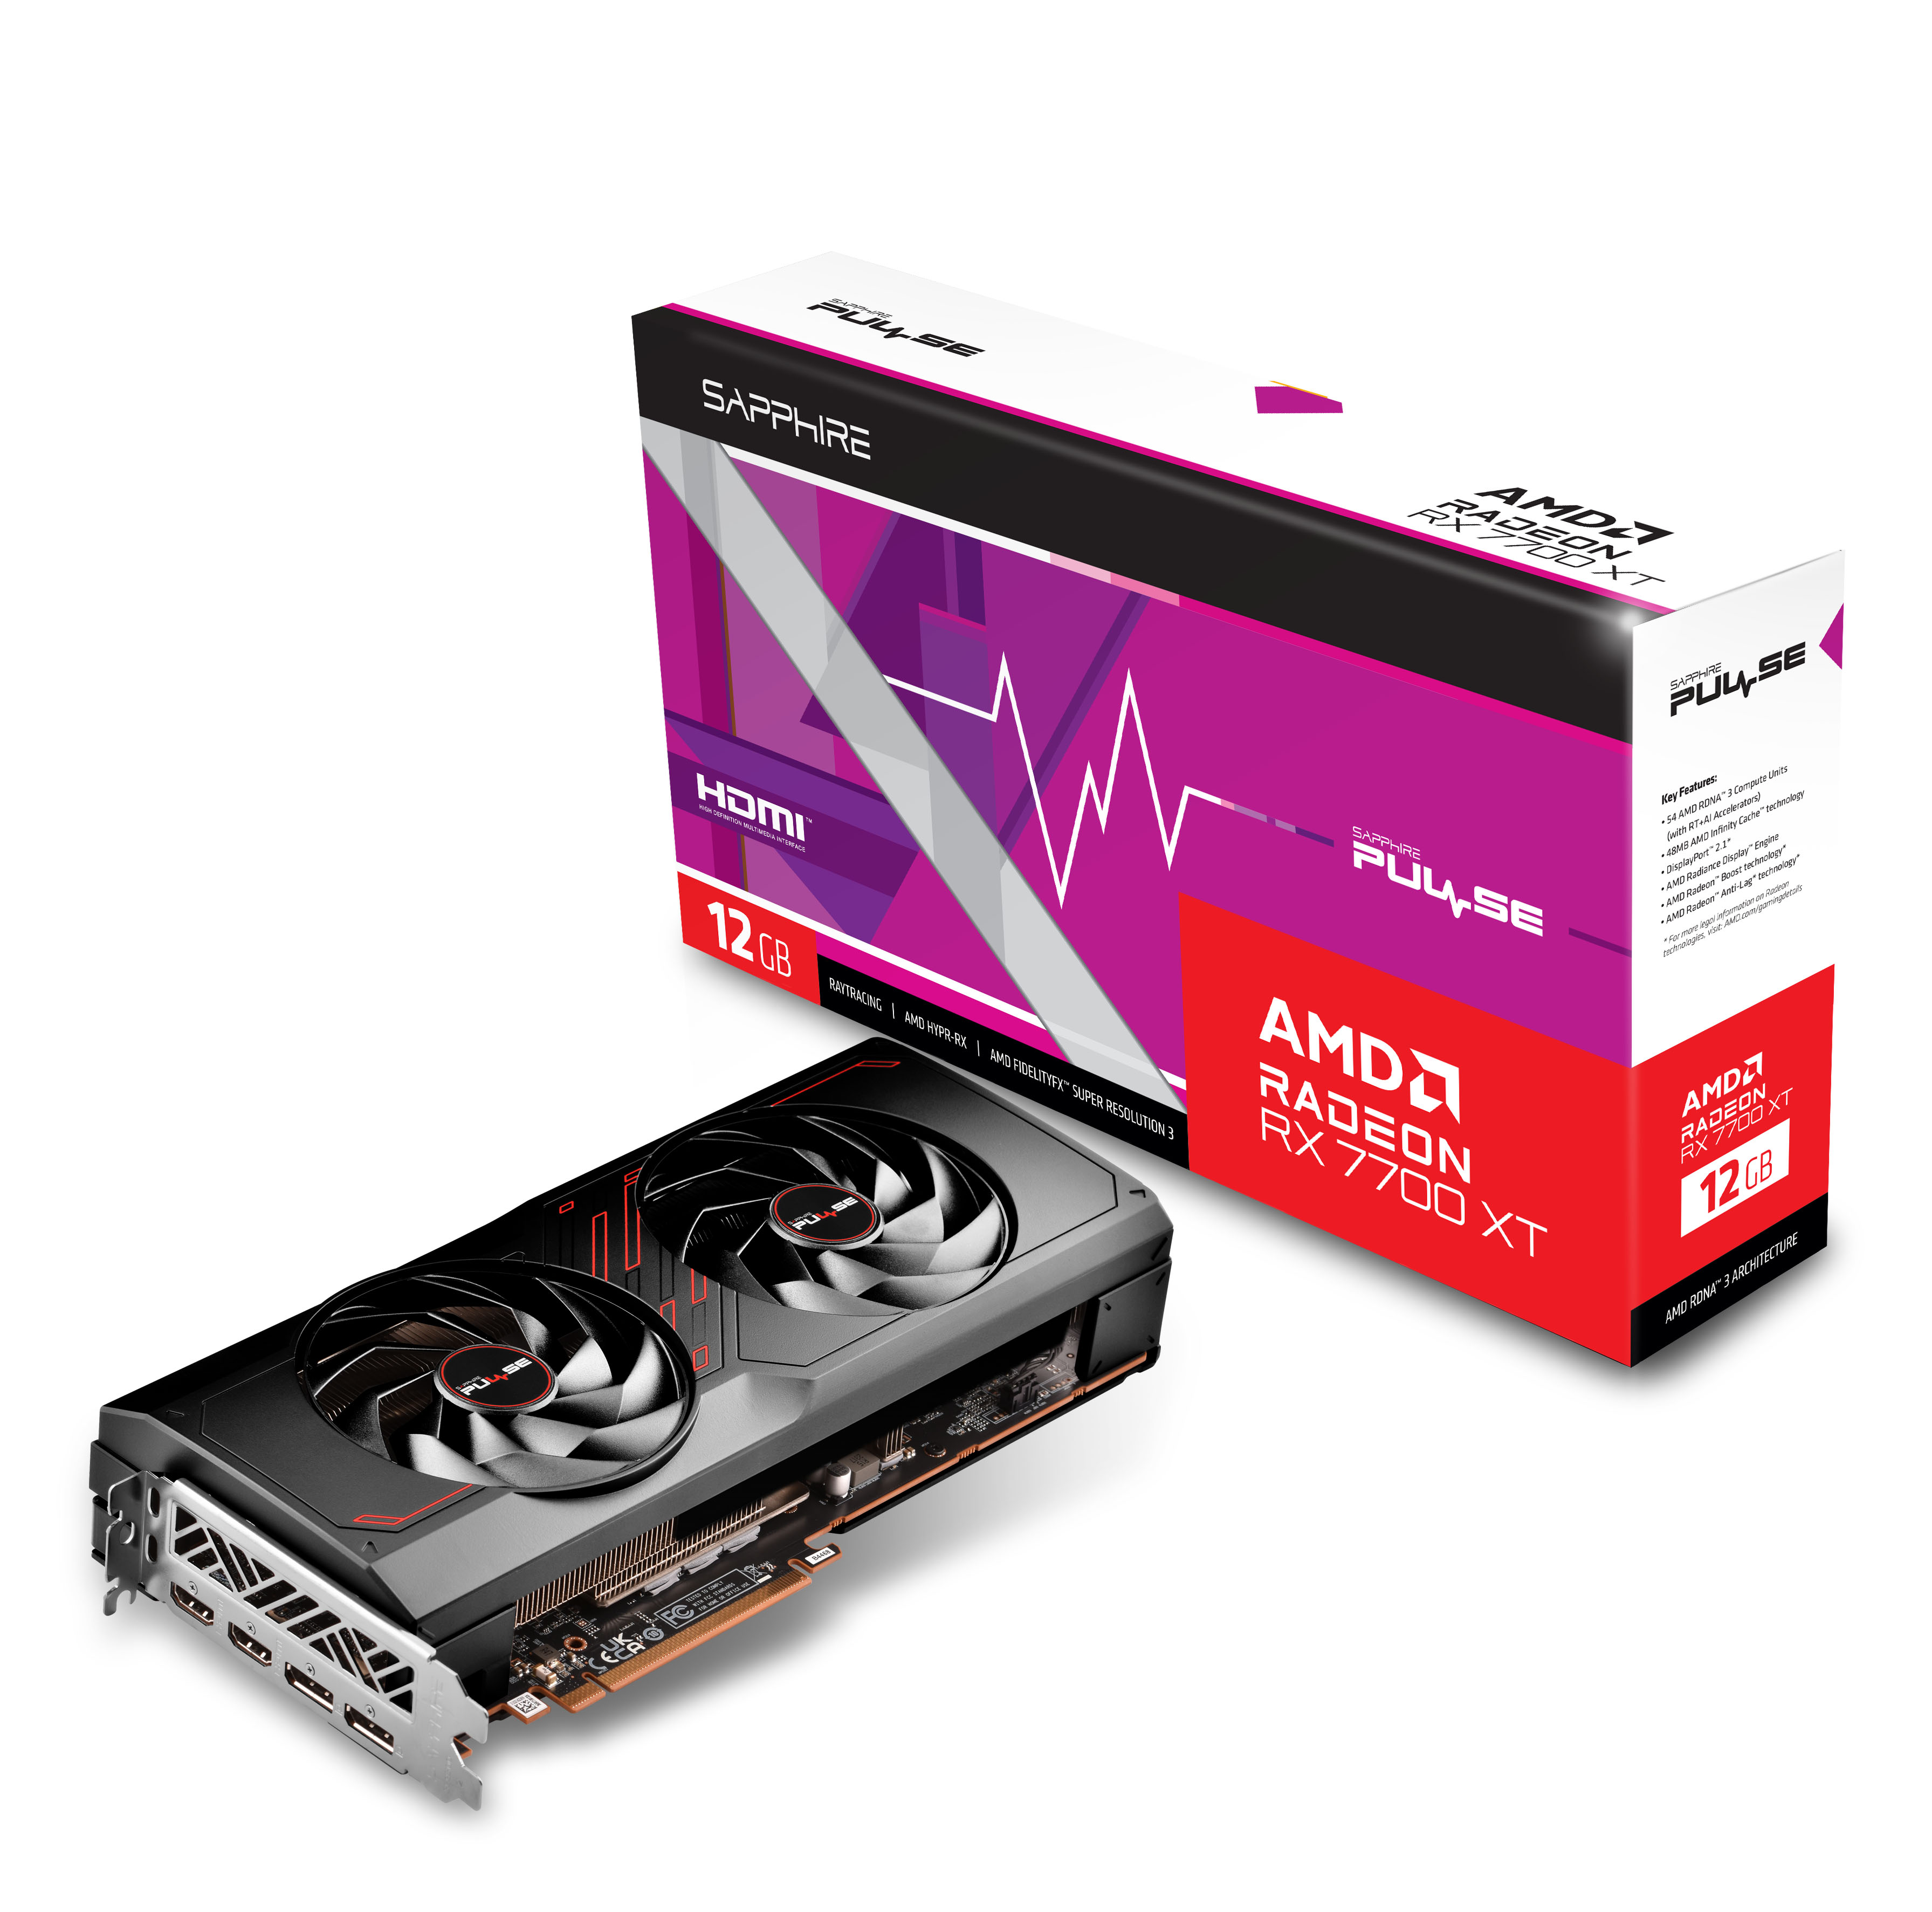 SAPPHIRE PULSE AMD Radeon™ RX 7700 XT Gaming Graphics Card with 12GB GDDR6, AMD RDNA™ 3 architecture